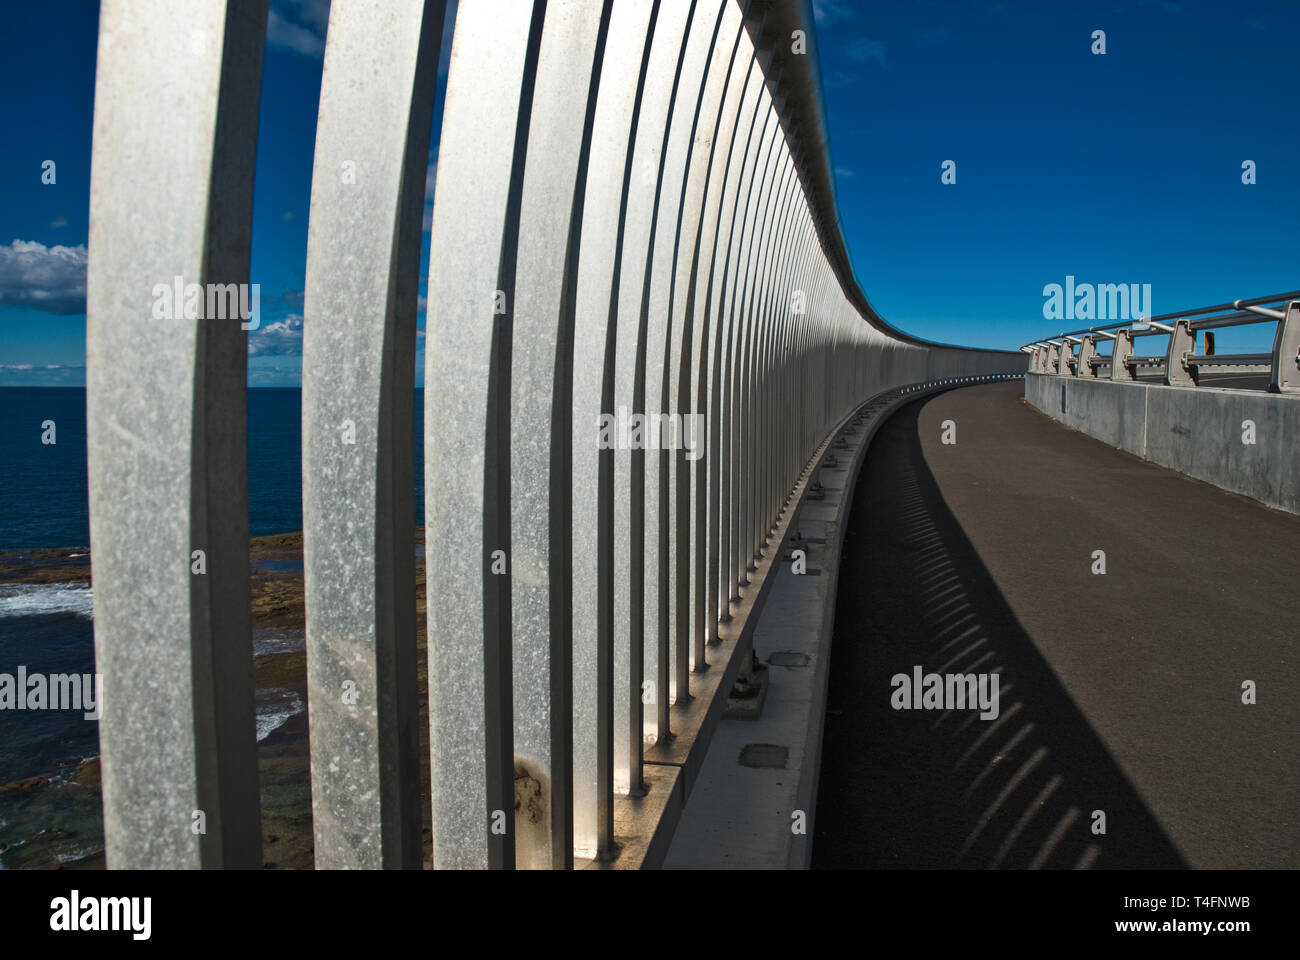 Gaps in the railing reveal some glimpses of Sea Cliff Bridge Ocean Views with Blue Skies. Stock Photo